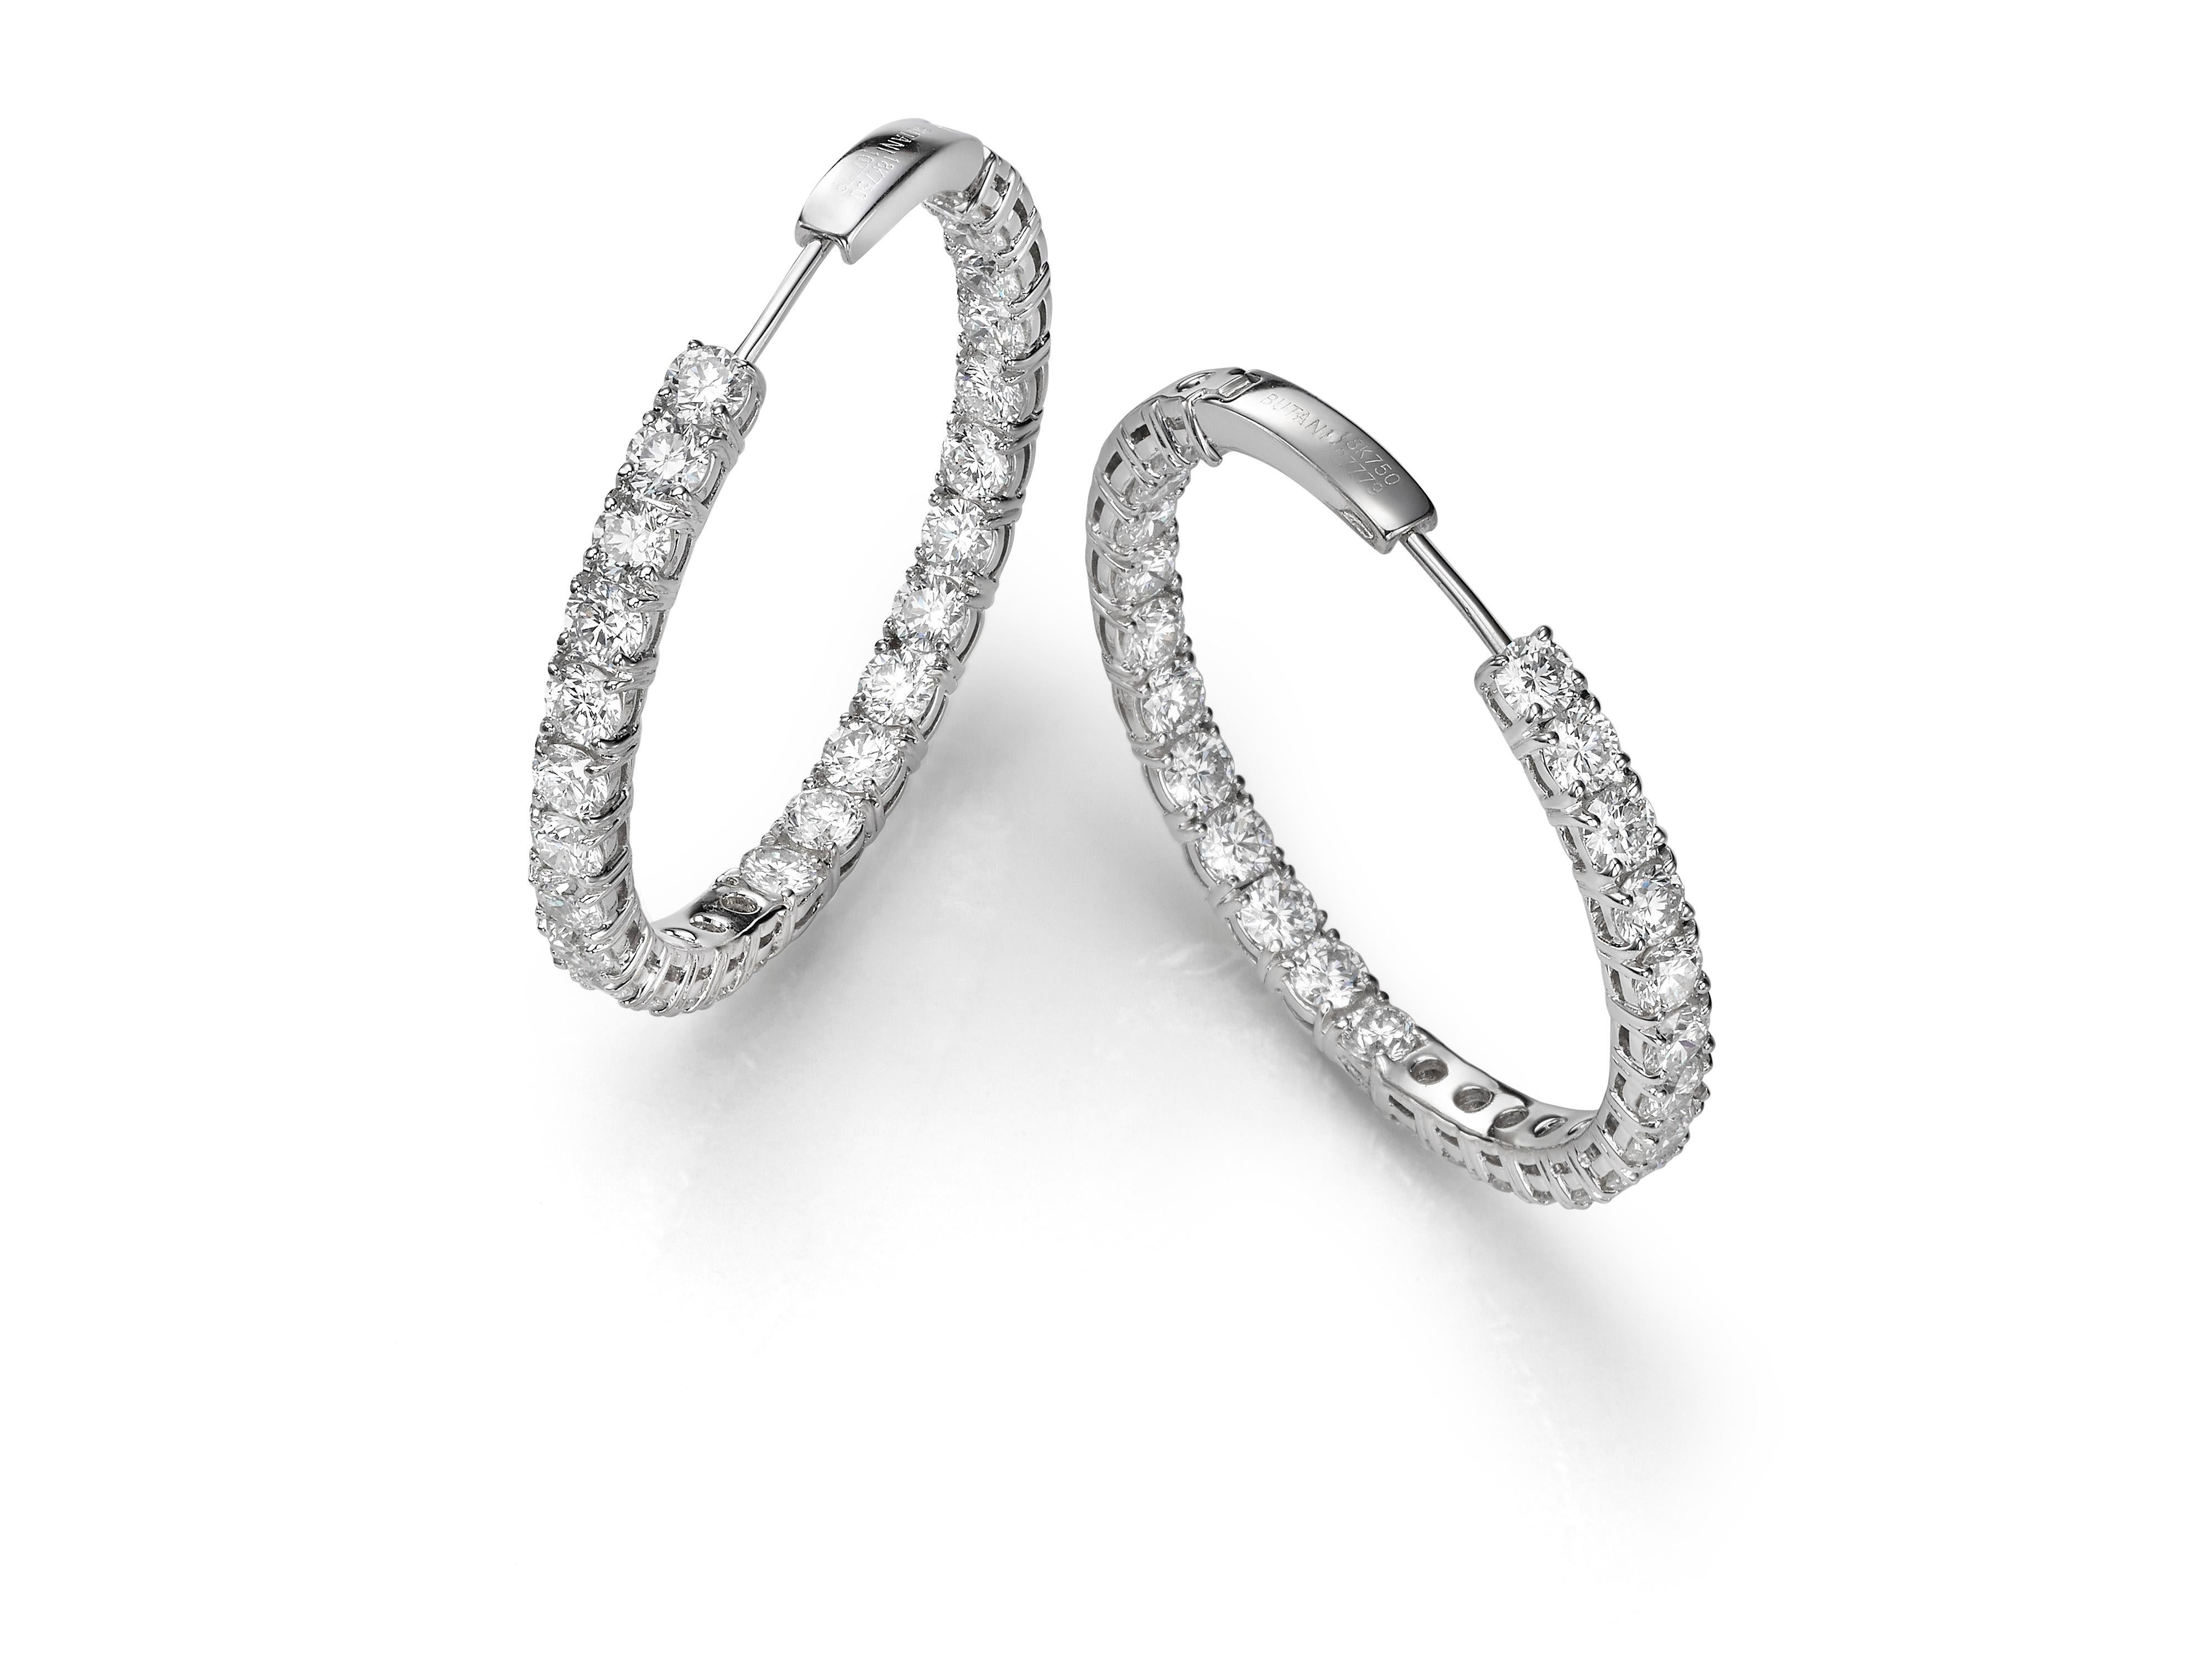 Set in 18K white gold, these classic diamond hoop earrings are encrusted with 7.24 carats of round white diamonds.  The diamonds have been carefully placed inside the curved silhouette of the earring interior to ensure they glitter from all angles. 